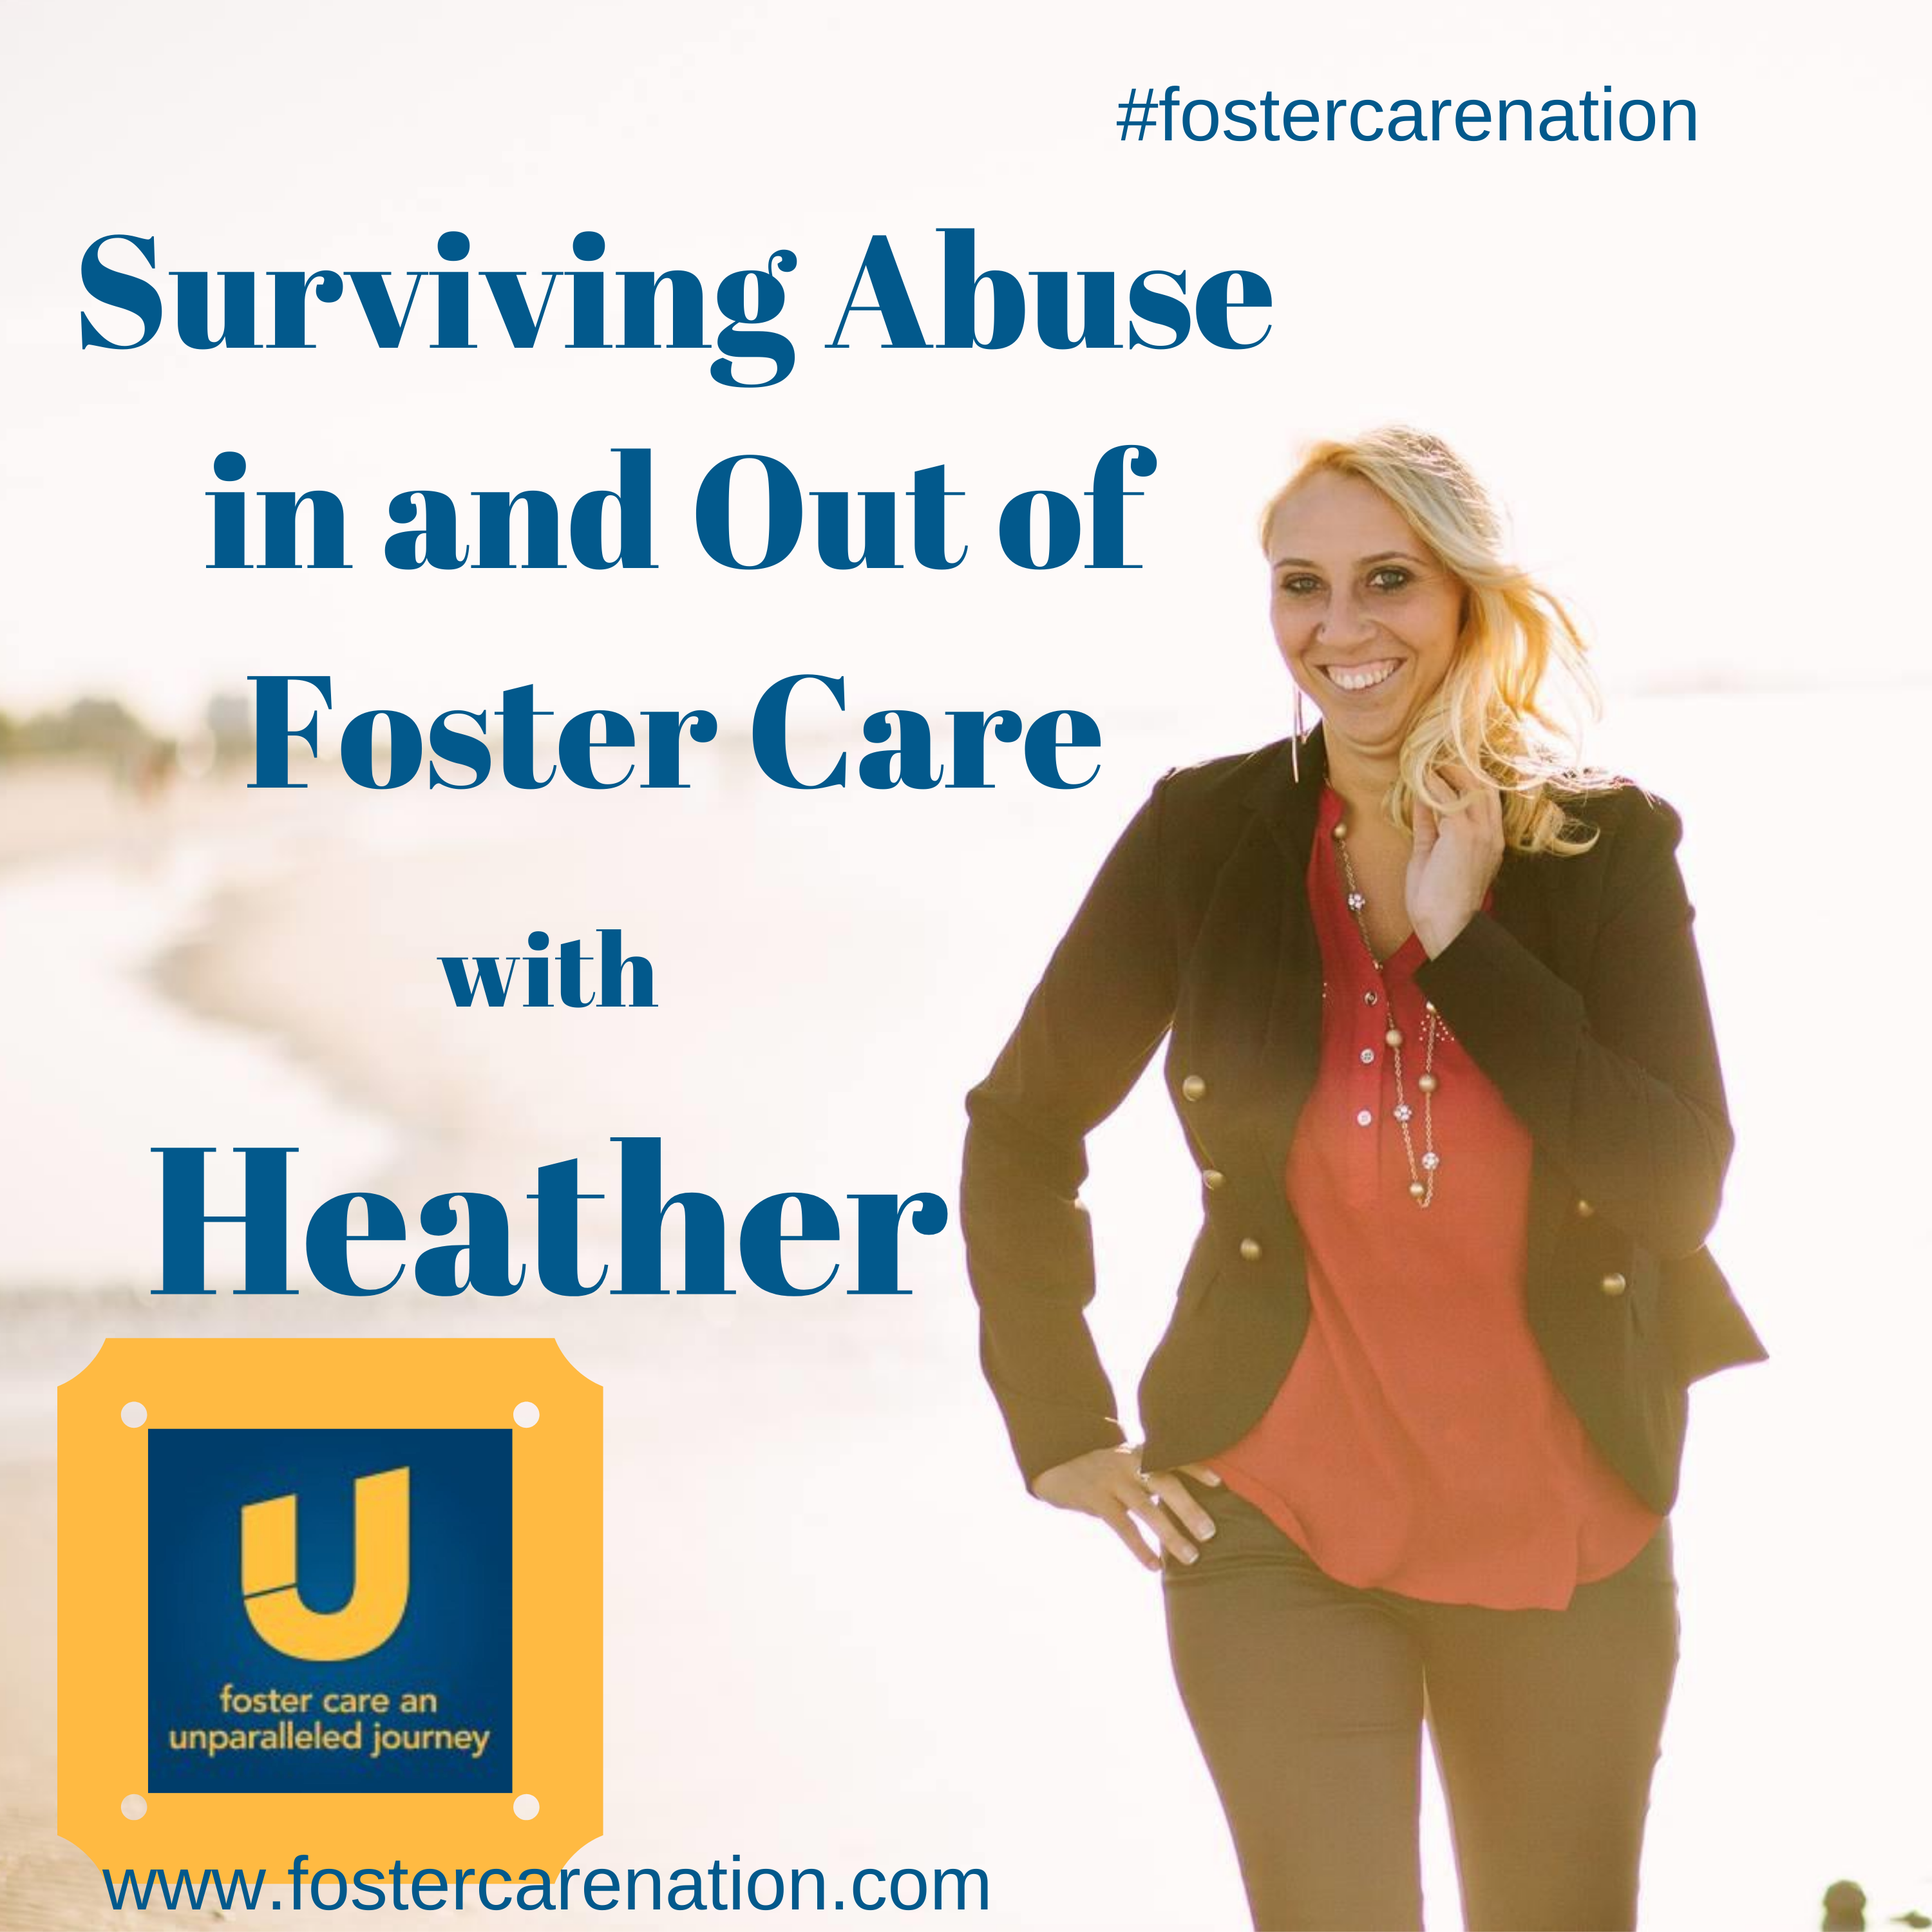 Surviving abuse in and out of foster care with heather